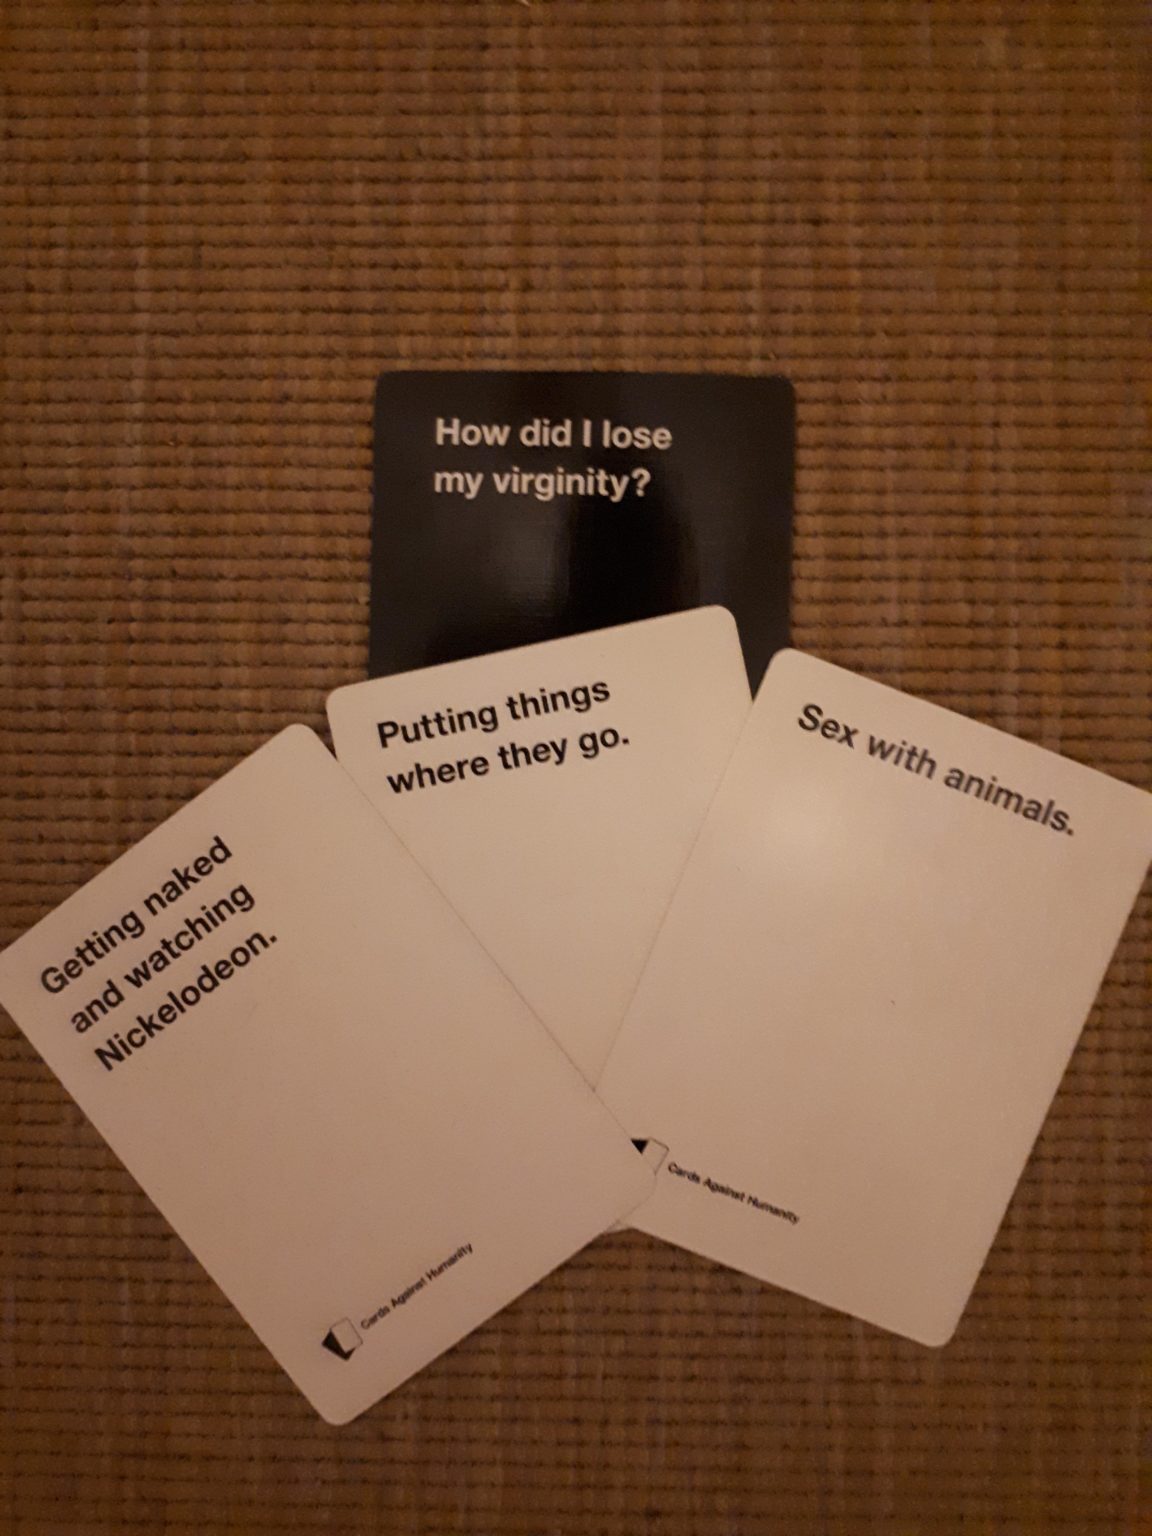 Best Worst Cards Of Humanity Combinations 33 1152x1536 